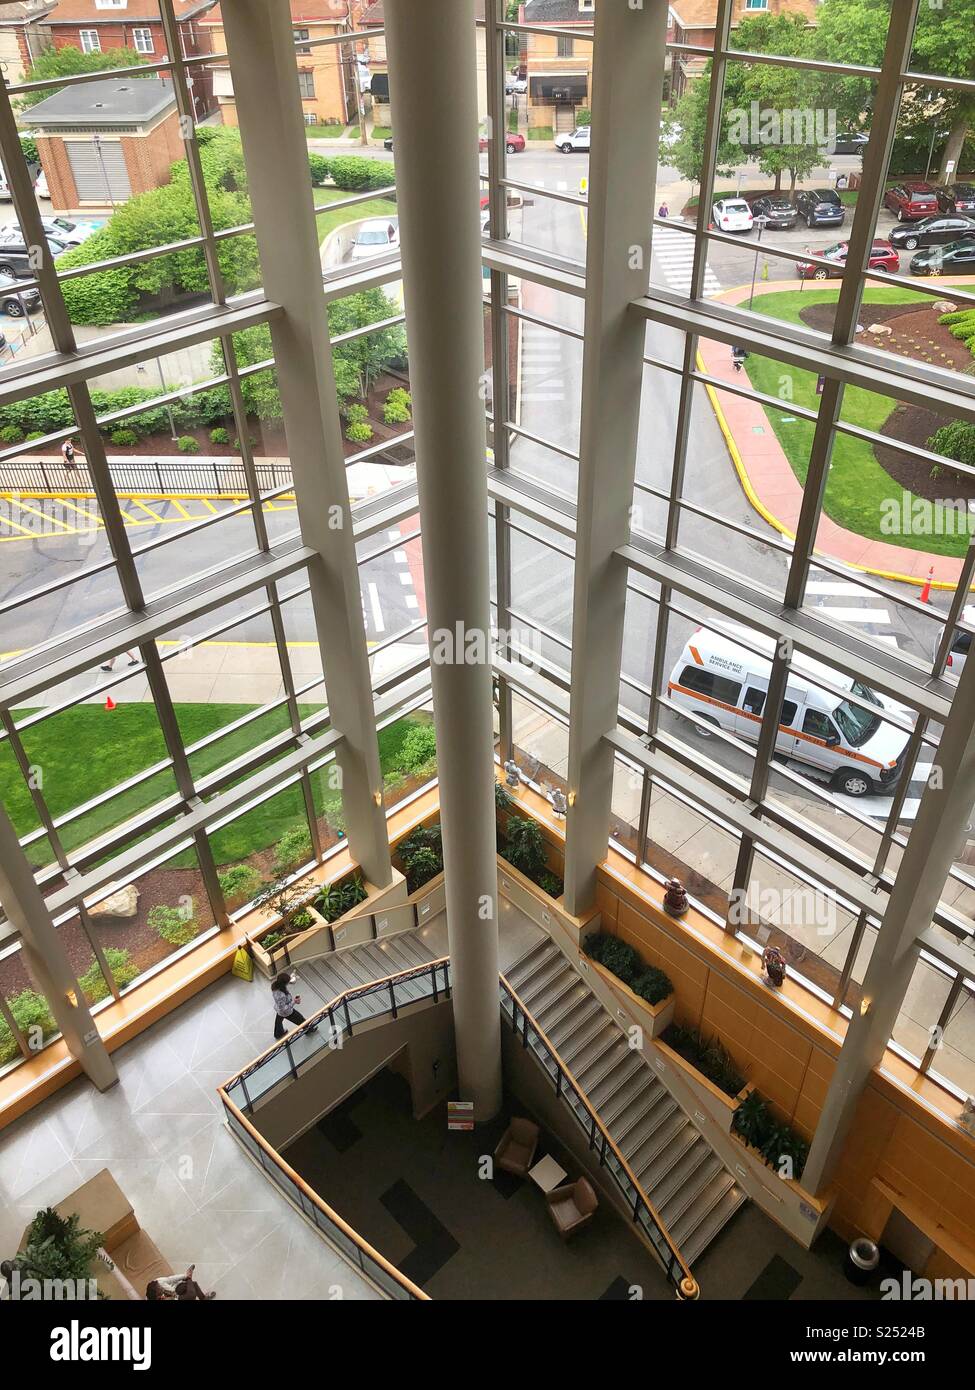 A view looking down into a large glass atrium from above Stock Photo